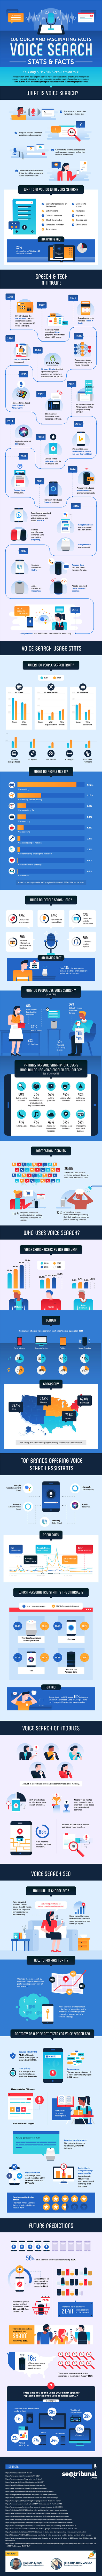 Trends in SEO - voice search for SEO